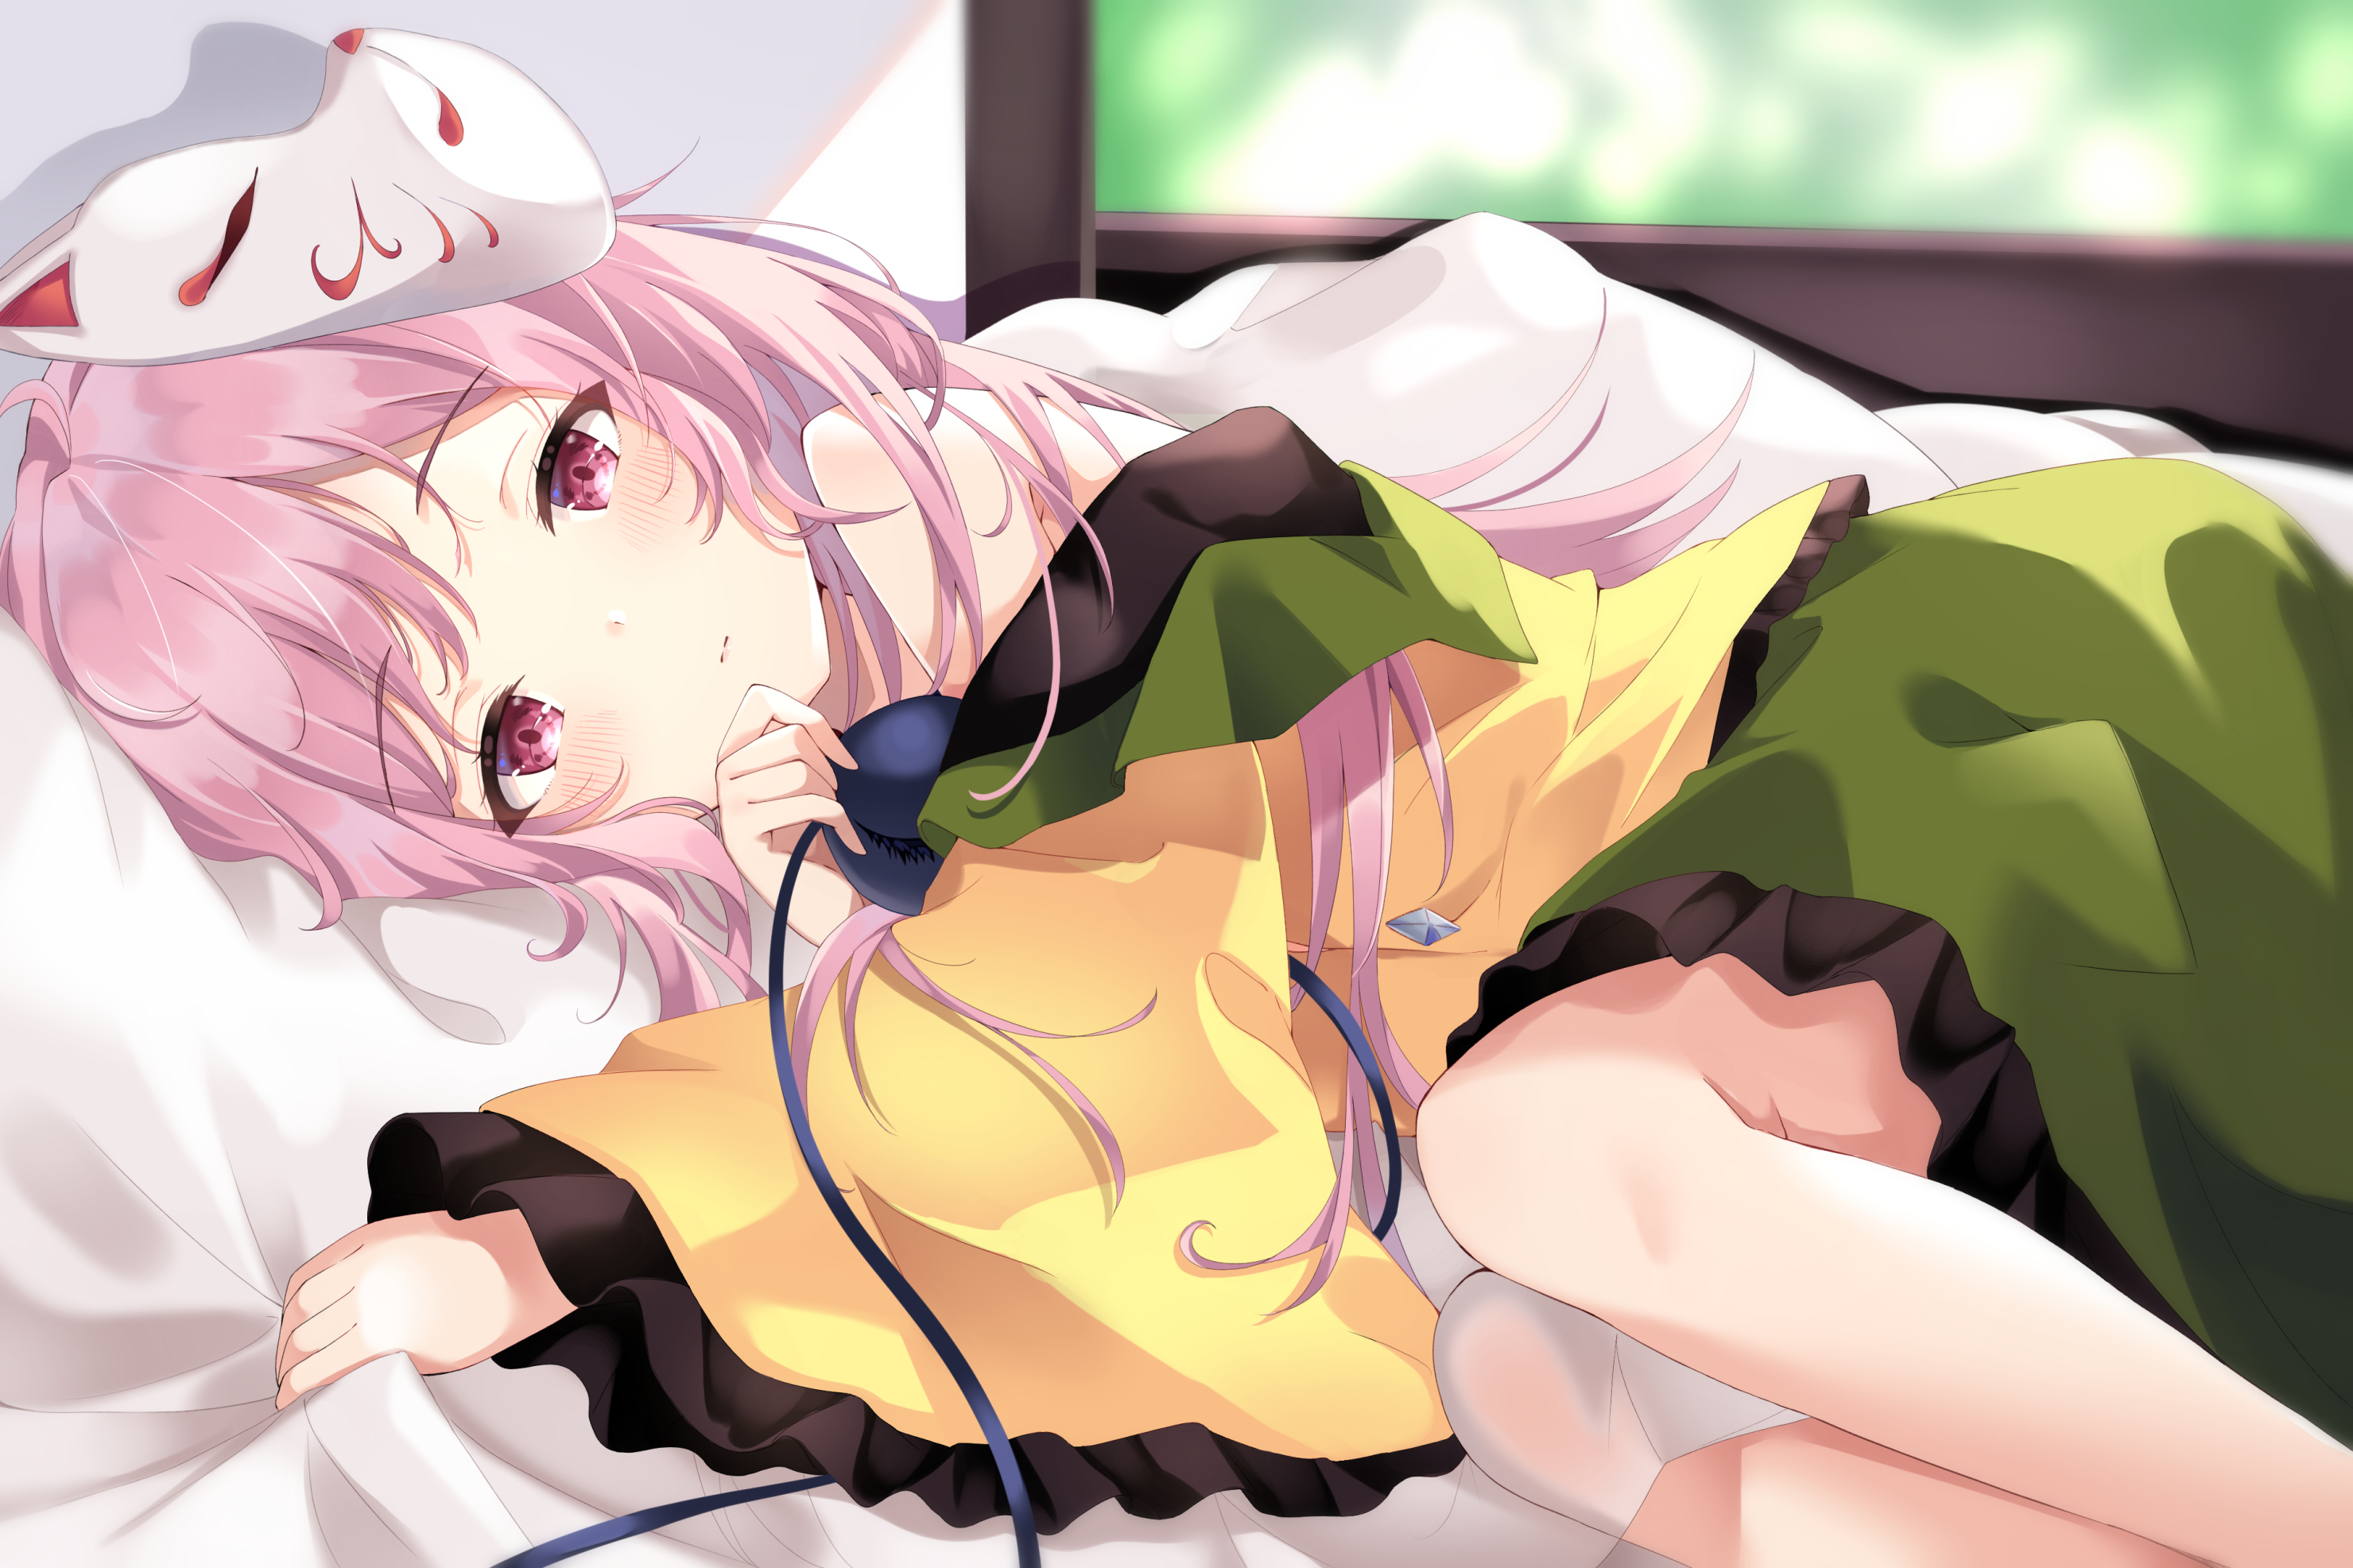 Anime Anime Girls Pink Hair Purple Eyes Knees Together Lying Down Mask Looking At Viewer Dress In Be 2960x1973